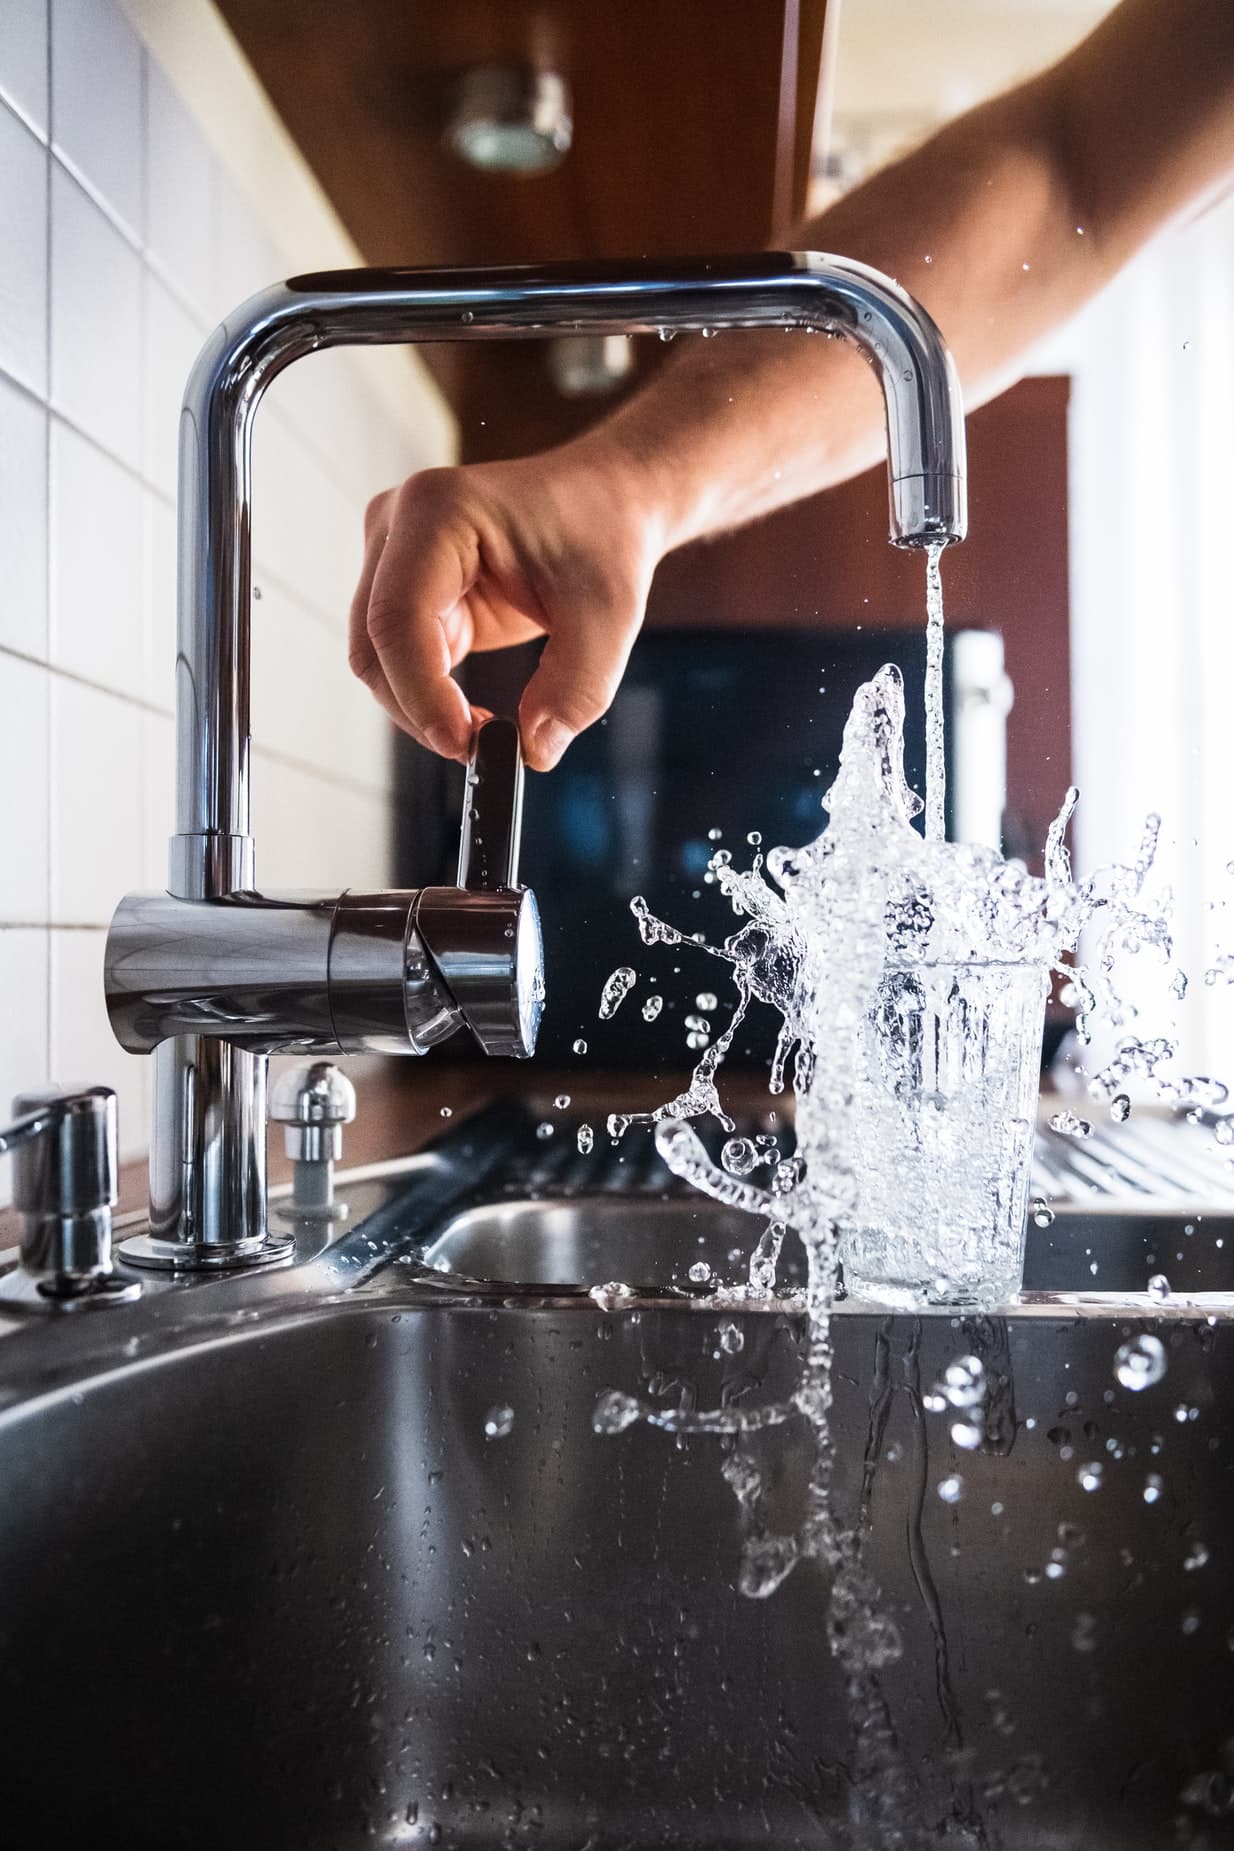 Plumbing safety basics dos and donts for diy wannabes